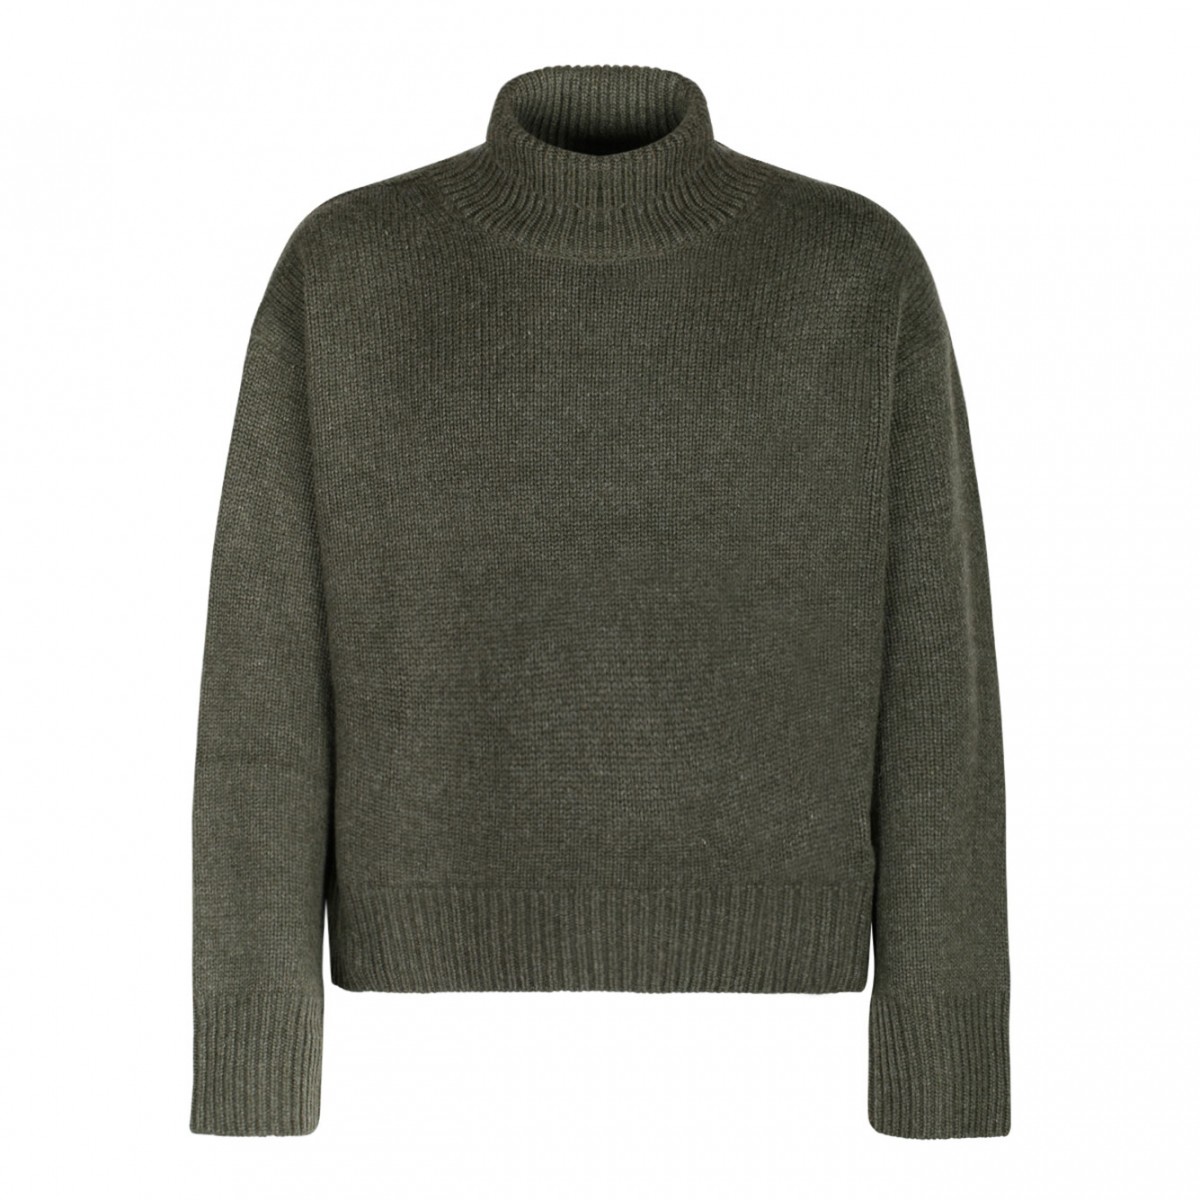 Military Green Cashmere Sweater